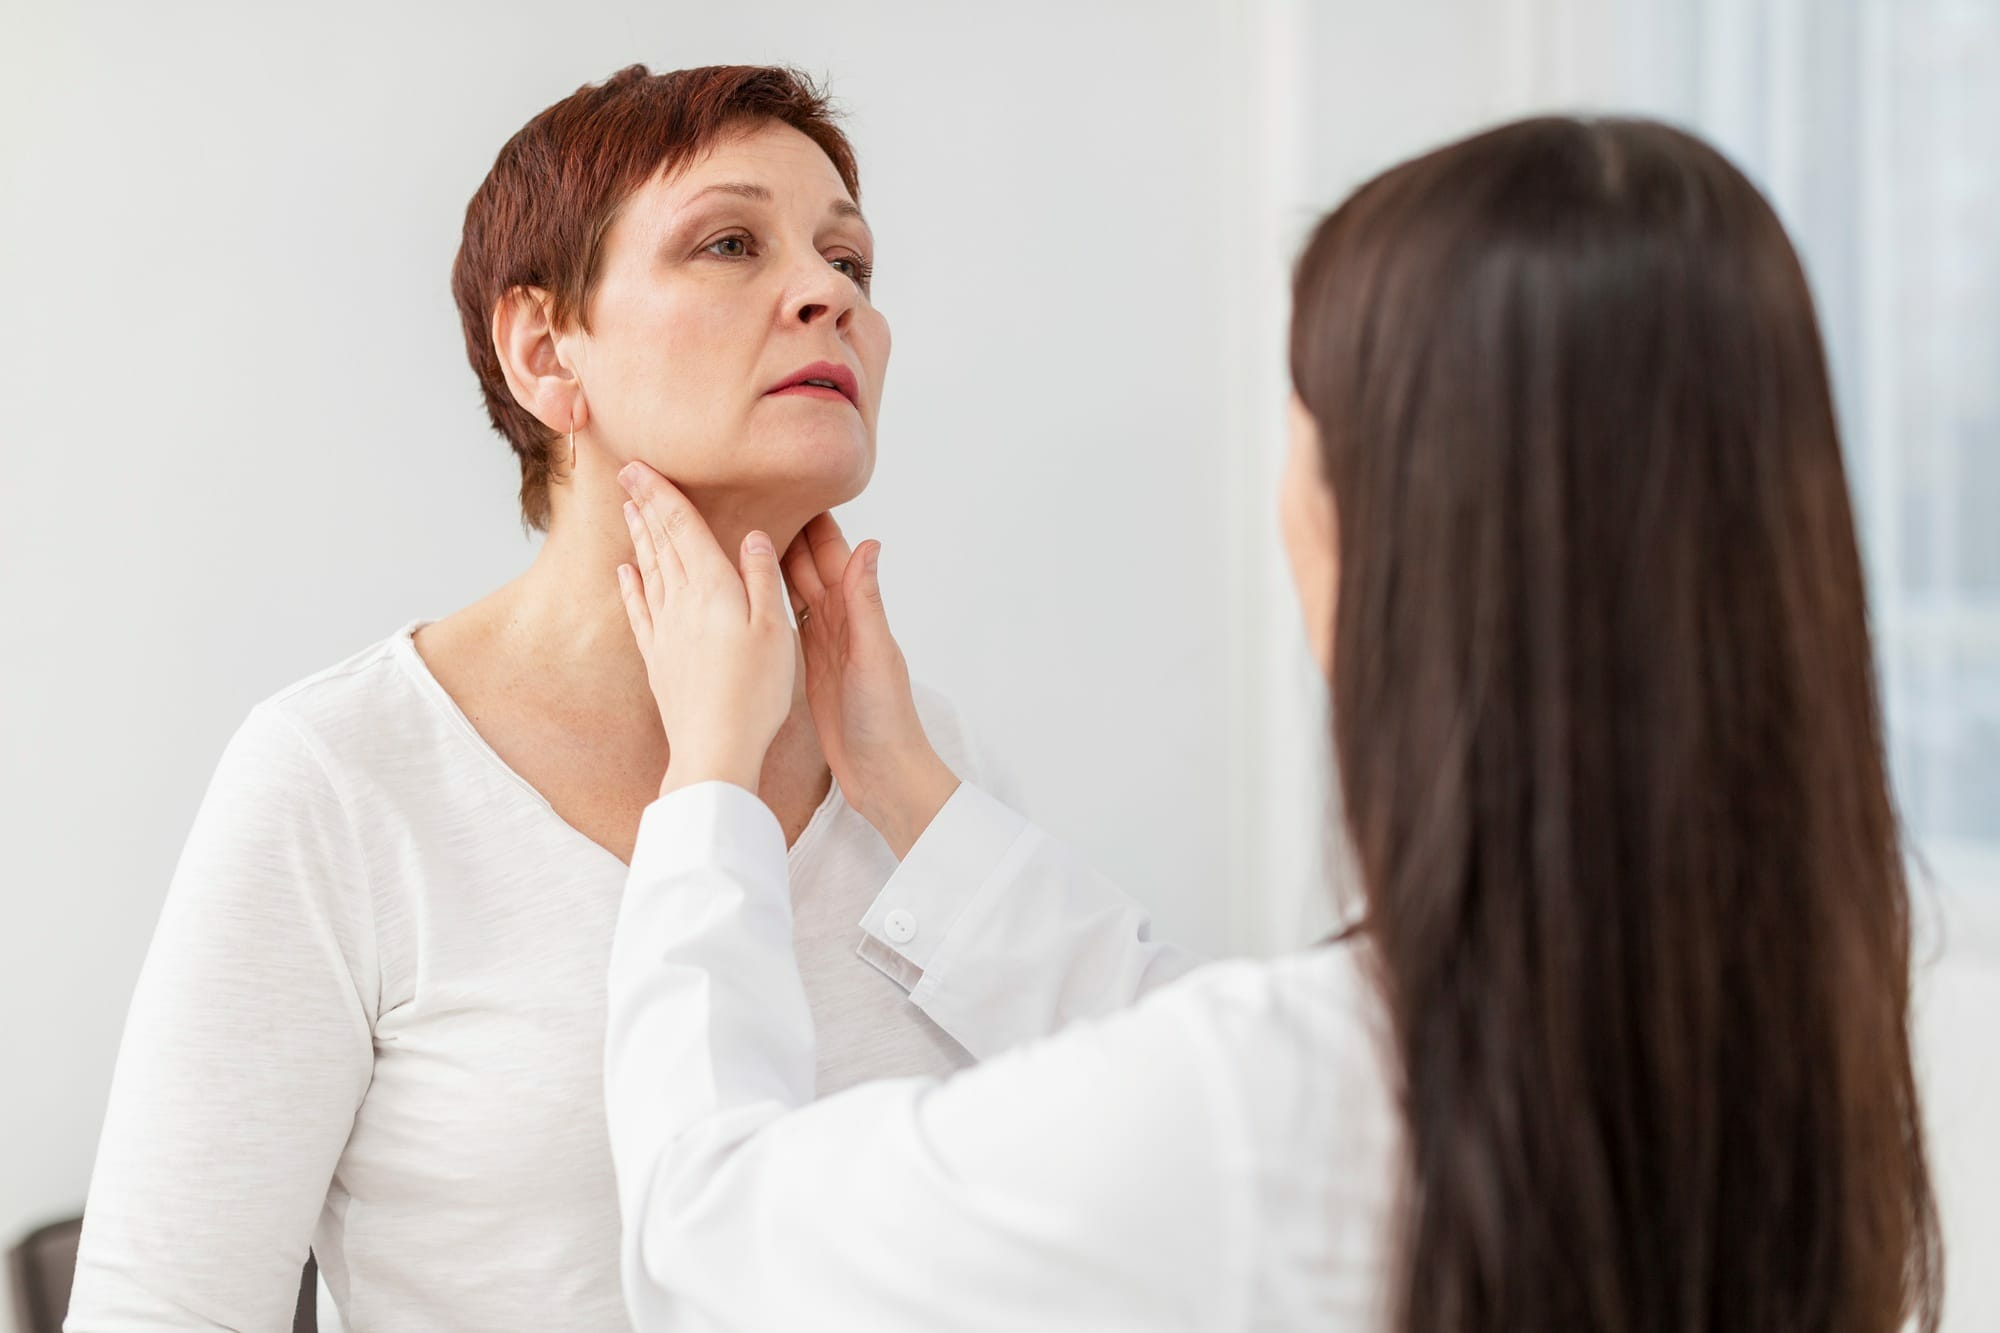 Hypothyroidism : What do I need to know?